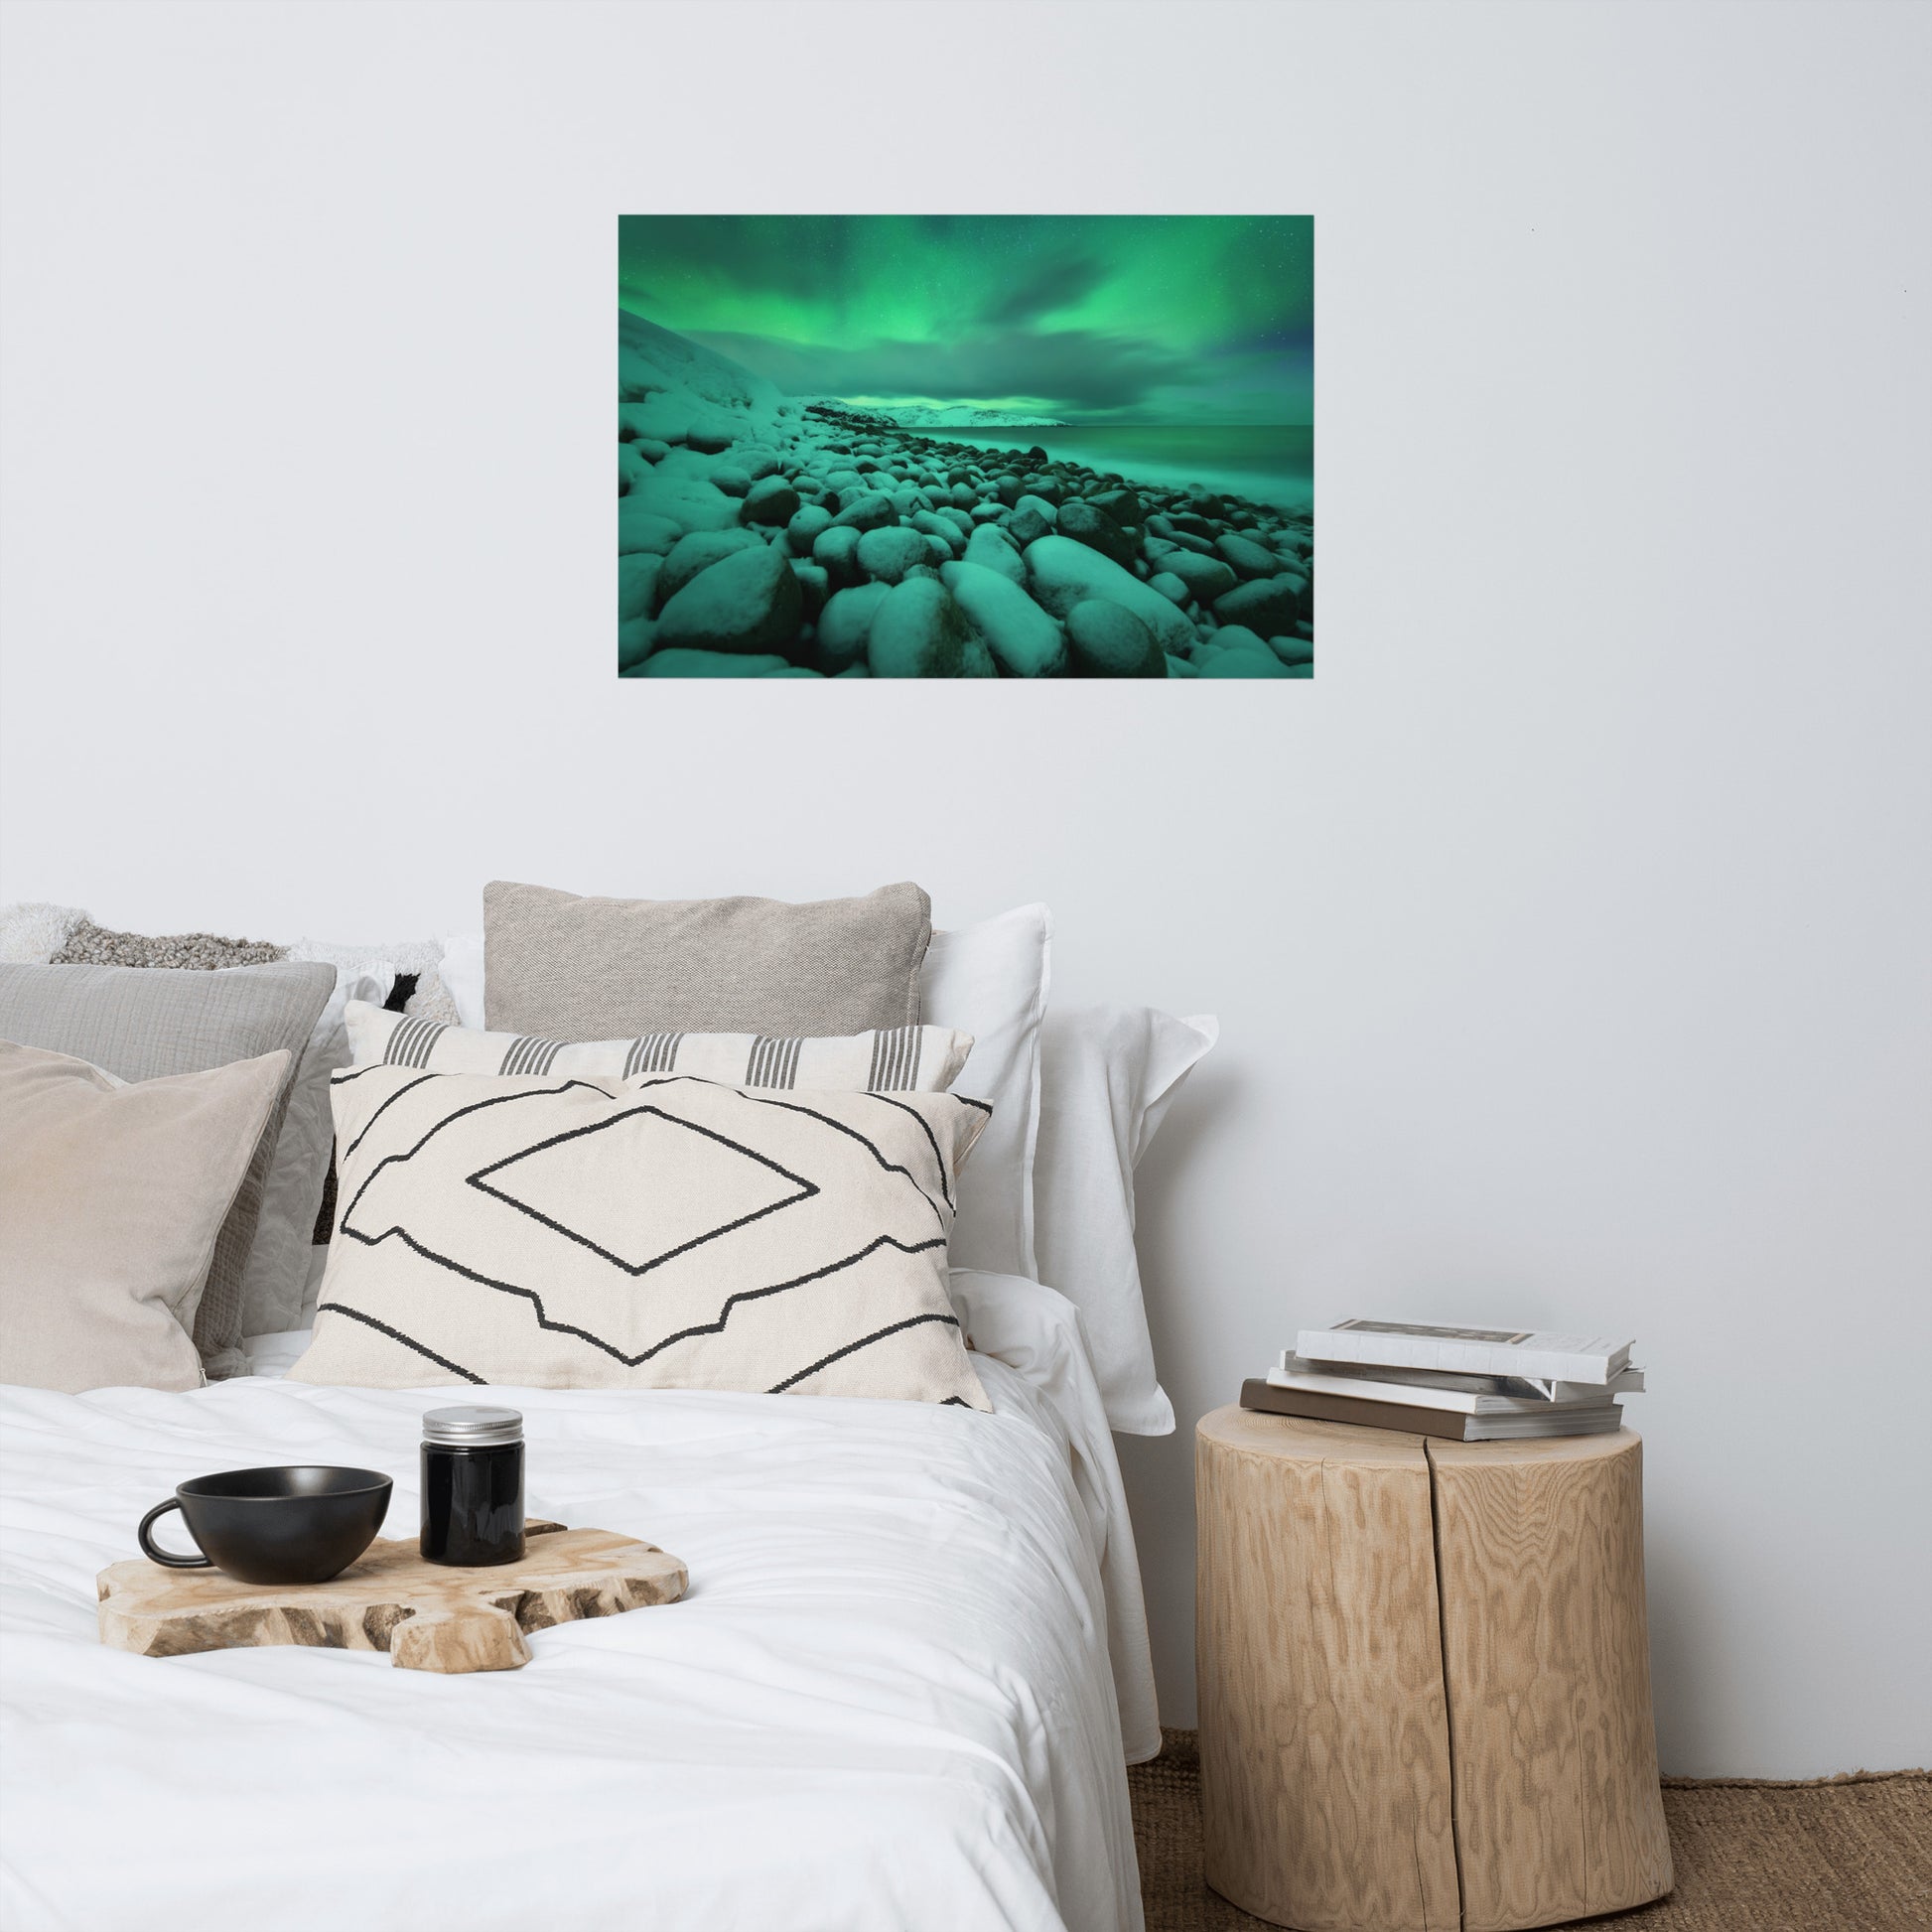 Bedroom Bed Wall Decor: Aurora Borealis Over Ocean in Teriberka Night - Northern Lights - Seascape - Rural / Country Style Landscape / Nature Loose / Unframed / Frameless / Frameable Photograph Wall Art Print - Artwork